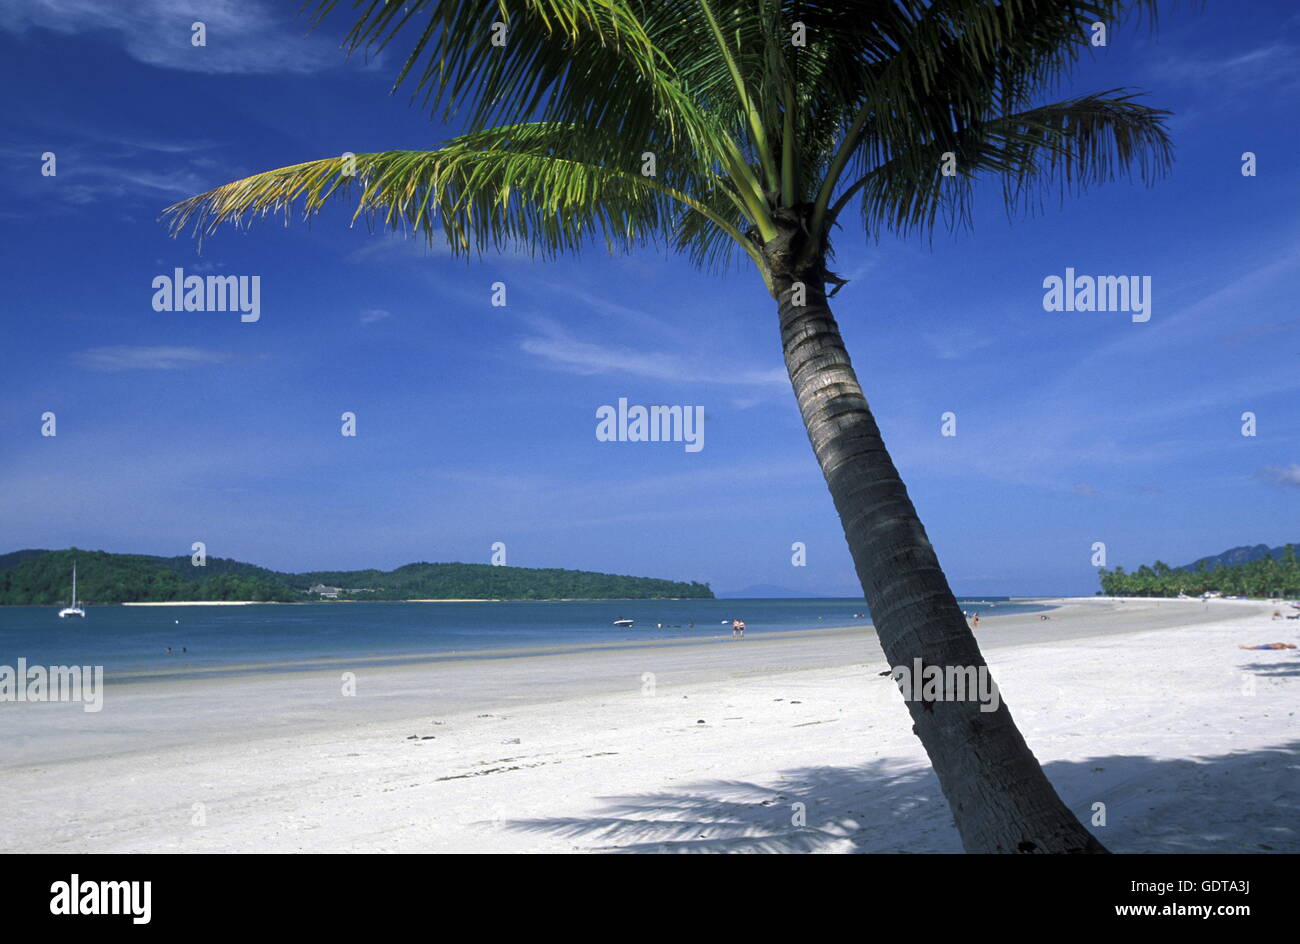 The Beach at Pantai Tanjung Rhu on the coast of Langkawi Island in the northwest of Malaysia Stock Photo